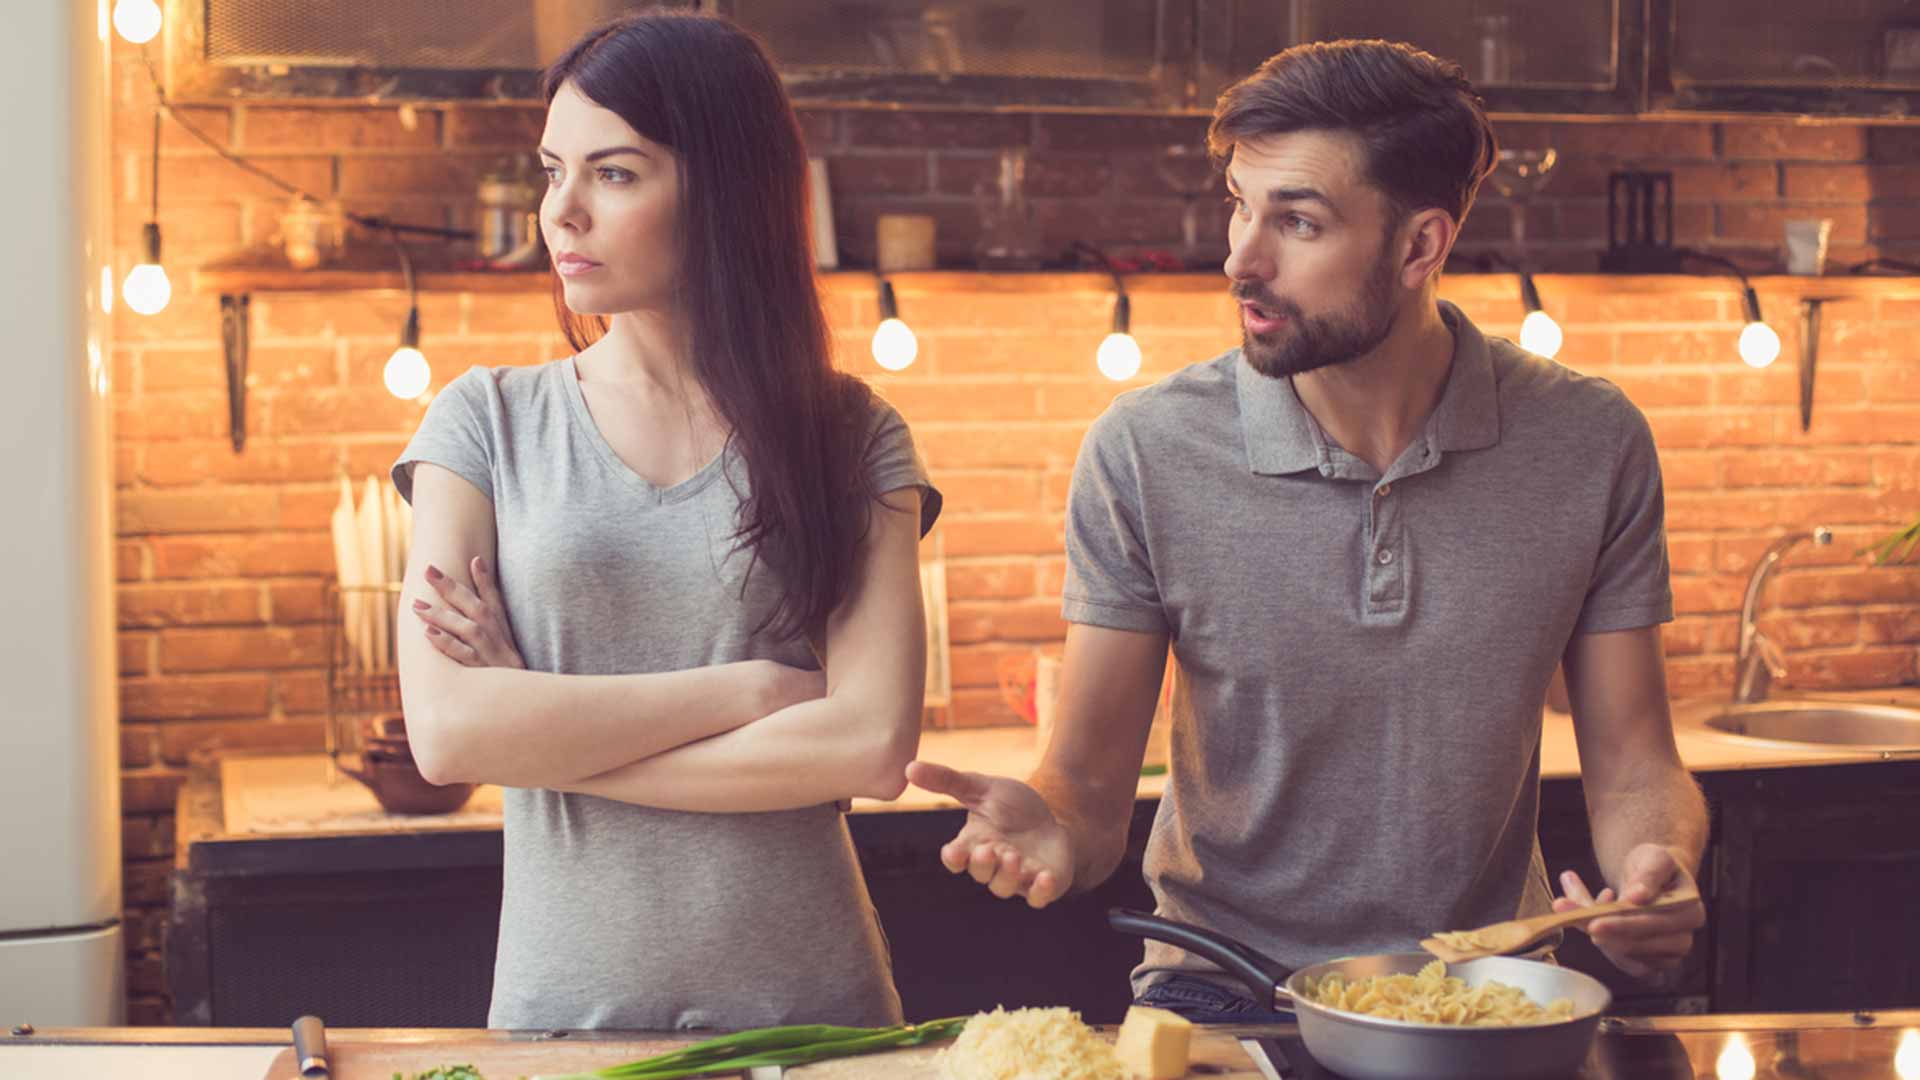 Women Who Do These 3 Things Drive Men Nuts